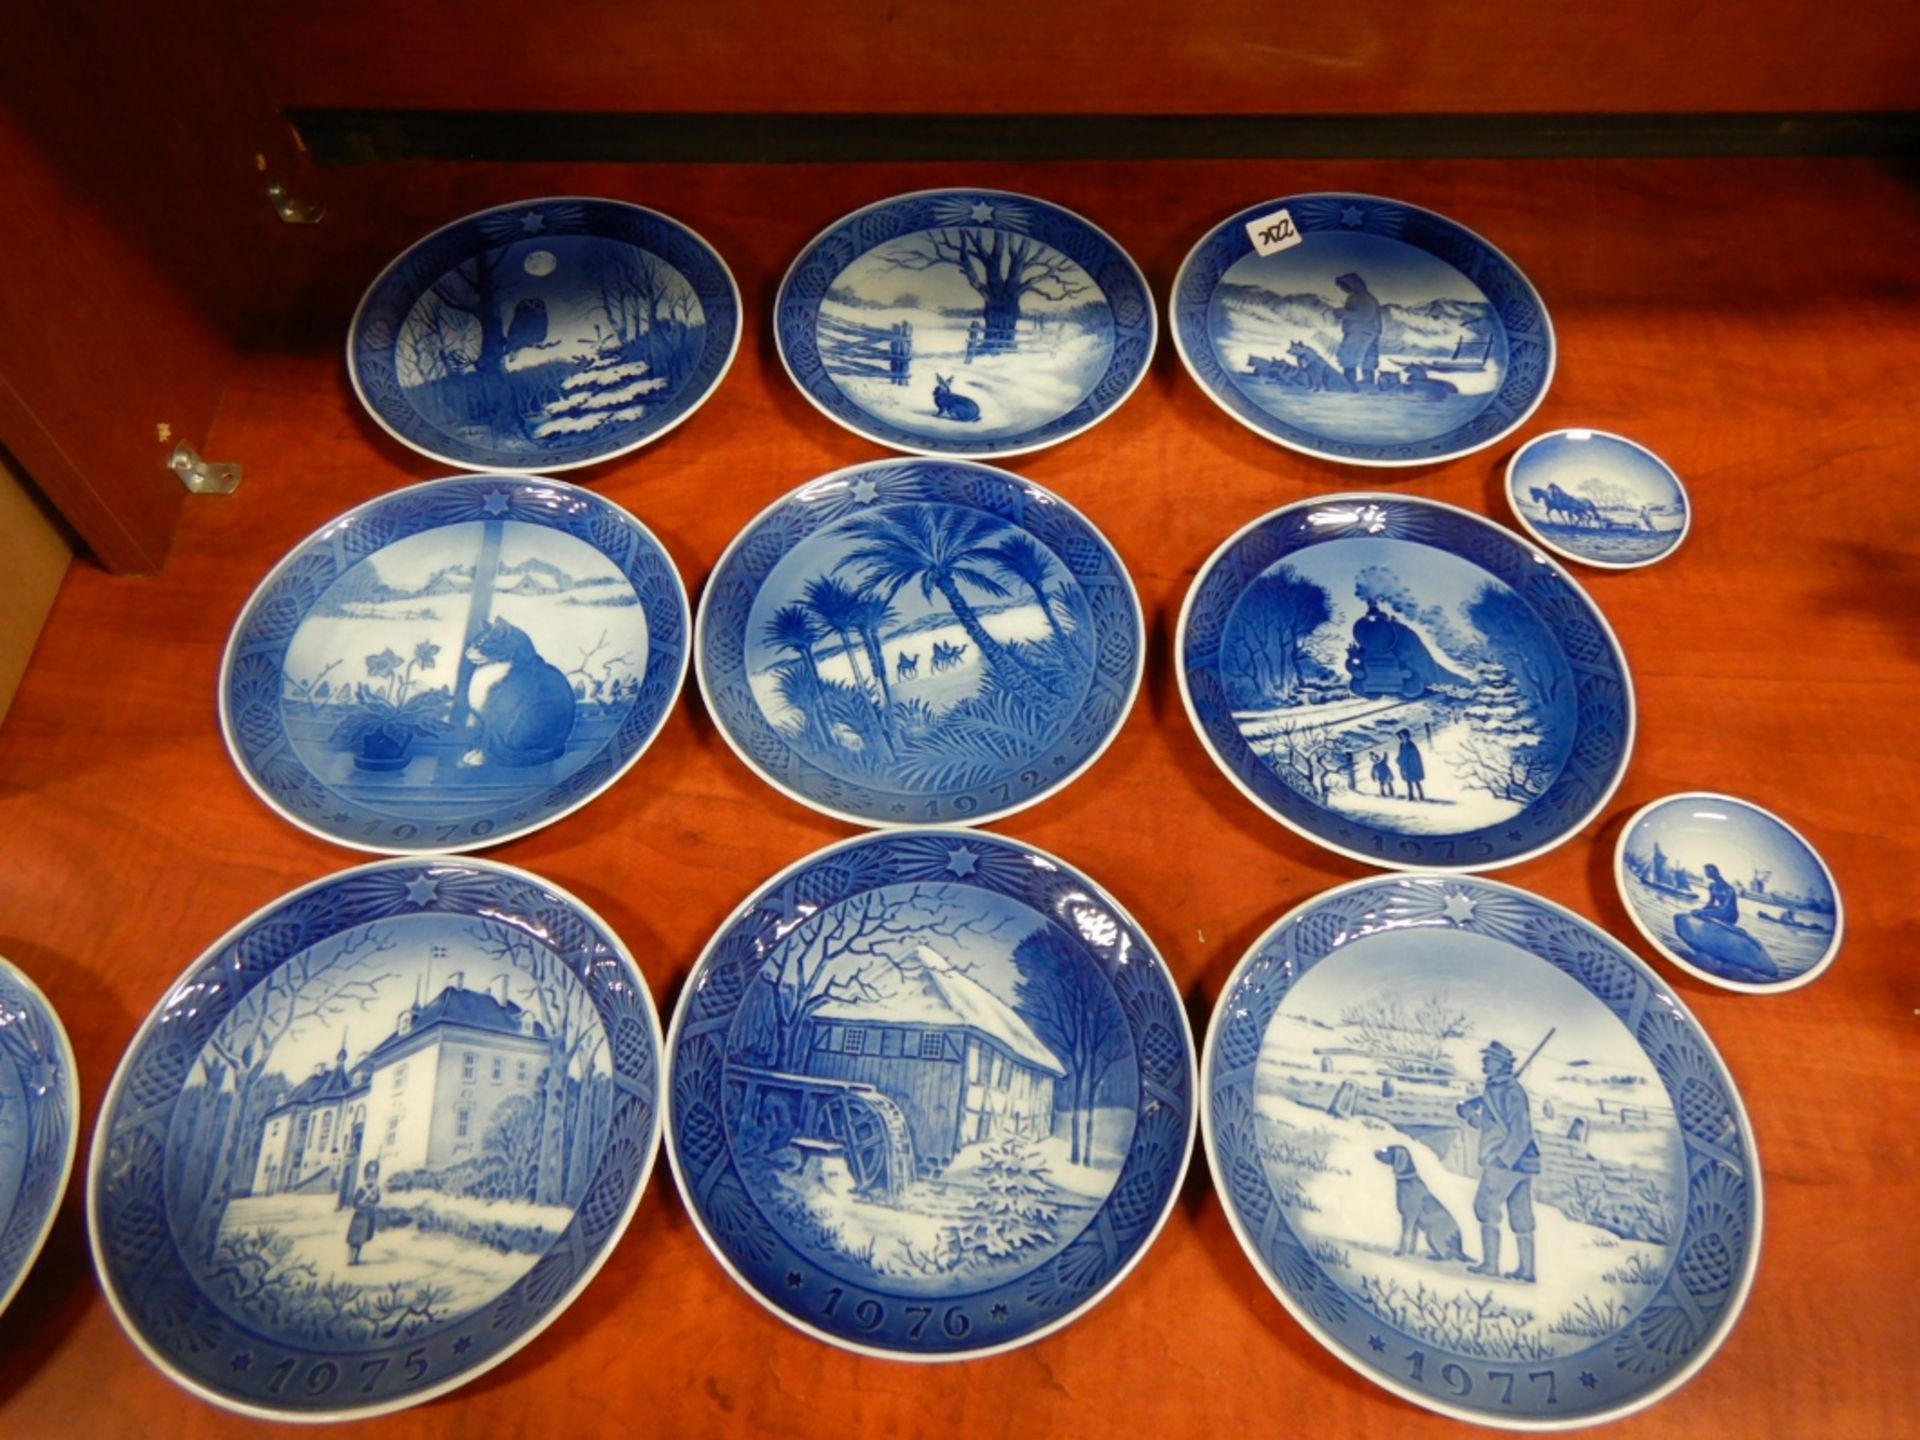 L/O ROYAL COPENHAGEN "GREENLAND SCENERY" COLLECTOR PLATES 1969-1979, 1-VIEWS OF WINNEPEG CHINA - Image 2 of 6